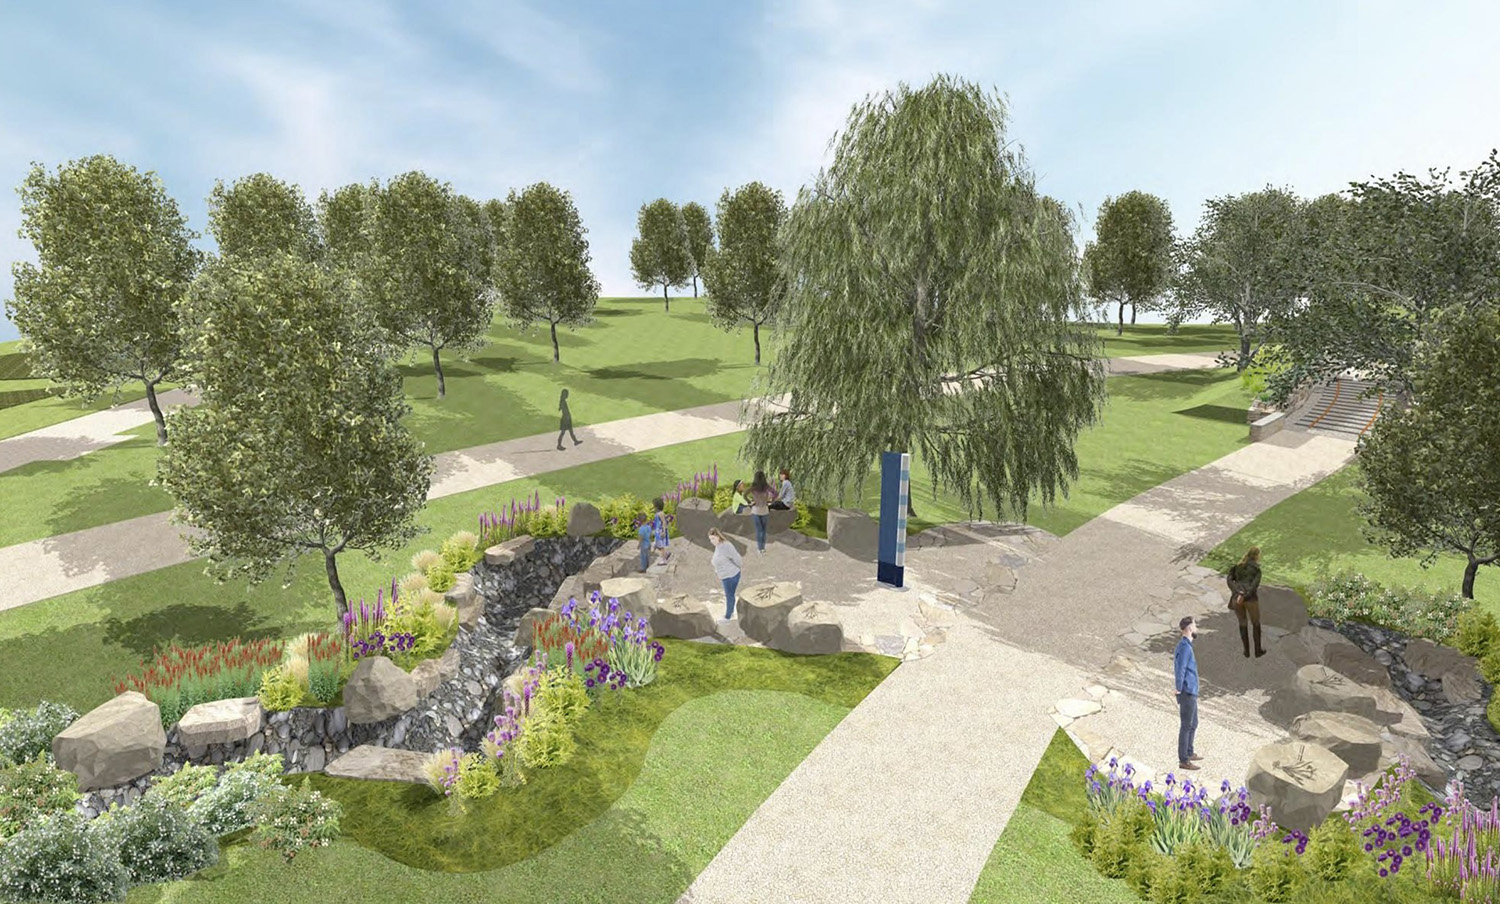 Native Planting Gardens at Chicago History Museum. Rendering by Amaze Design